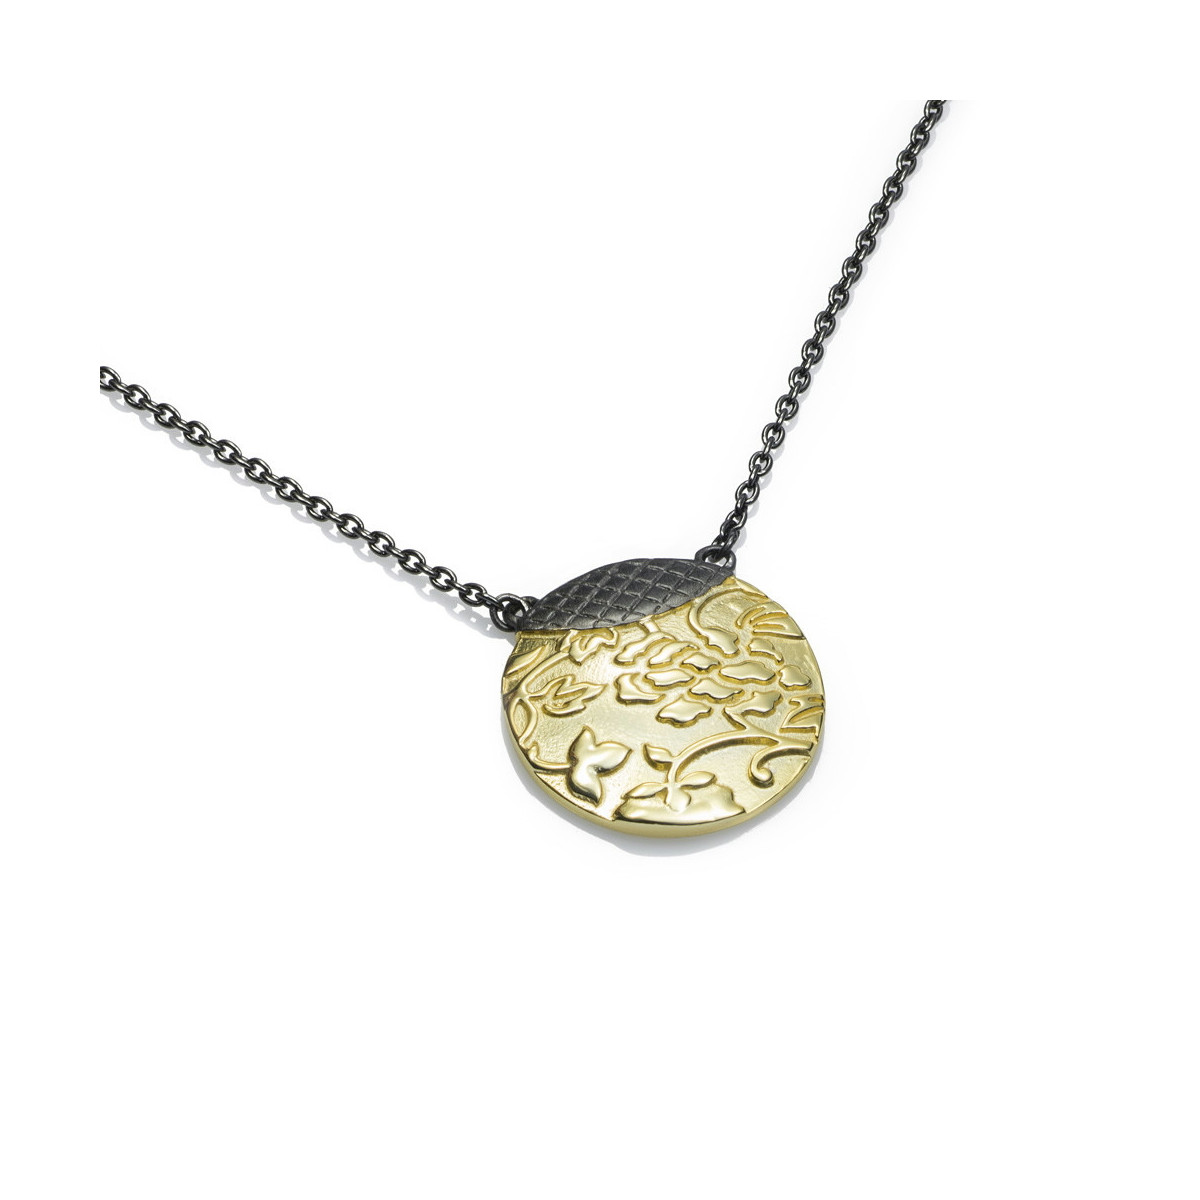 TOKYO Necklace in Silver. Black Ruthenium and 18k Gold Vermeil